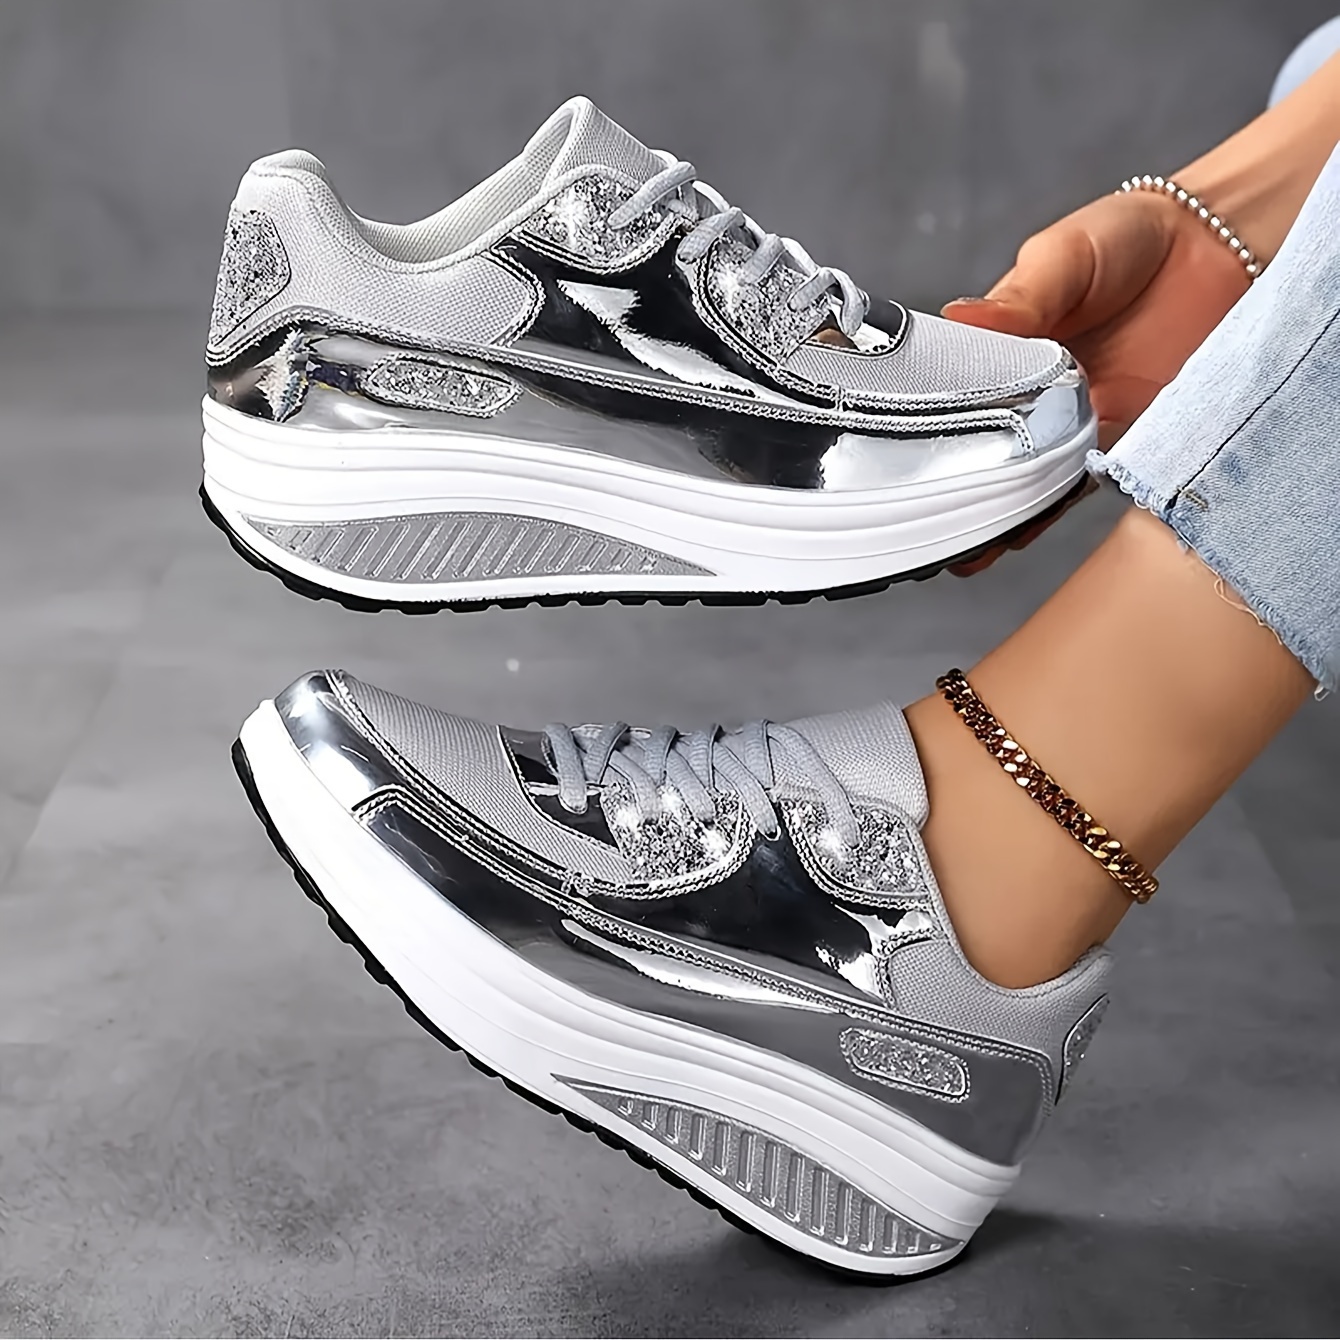 

Women's Casual Silvery Glitter Sneakers, Platform Wedge Outdoor Walking Shoes, Shiny Reflective Sports Shake Shoes